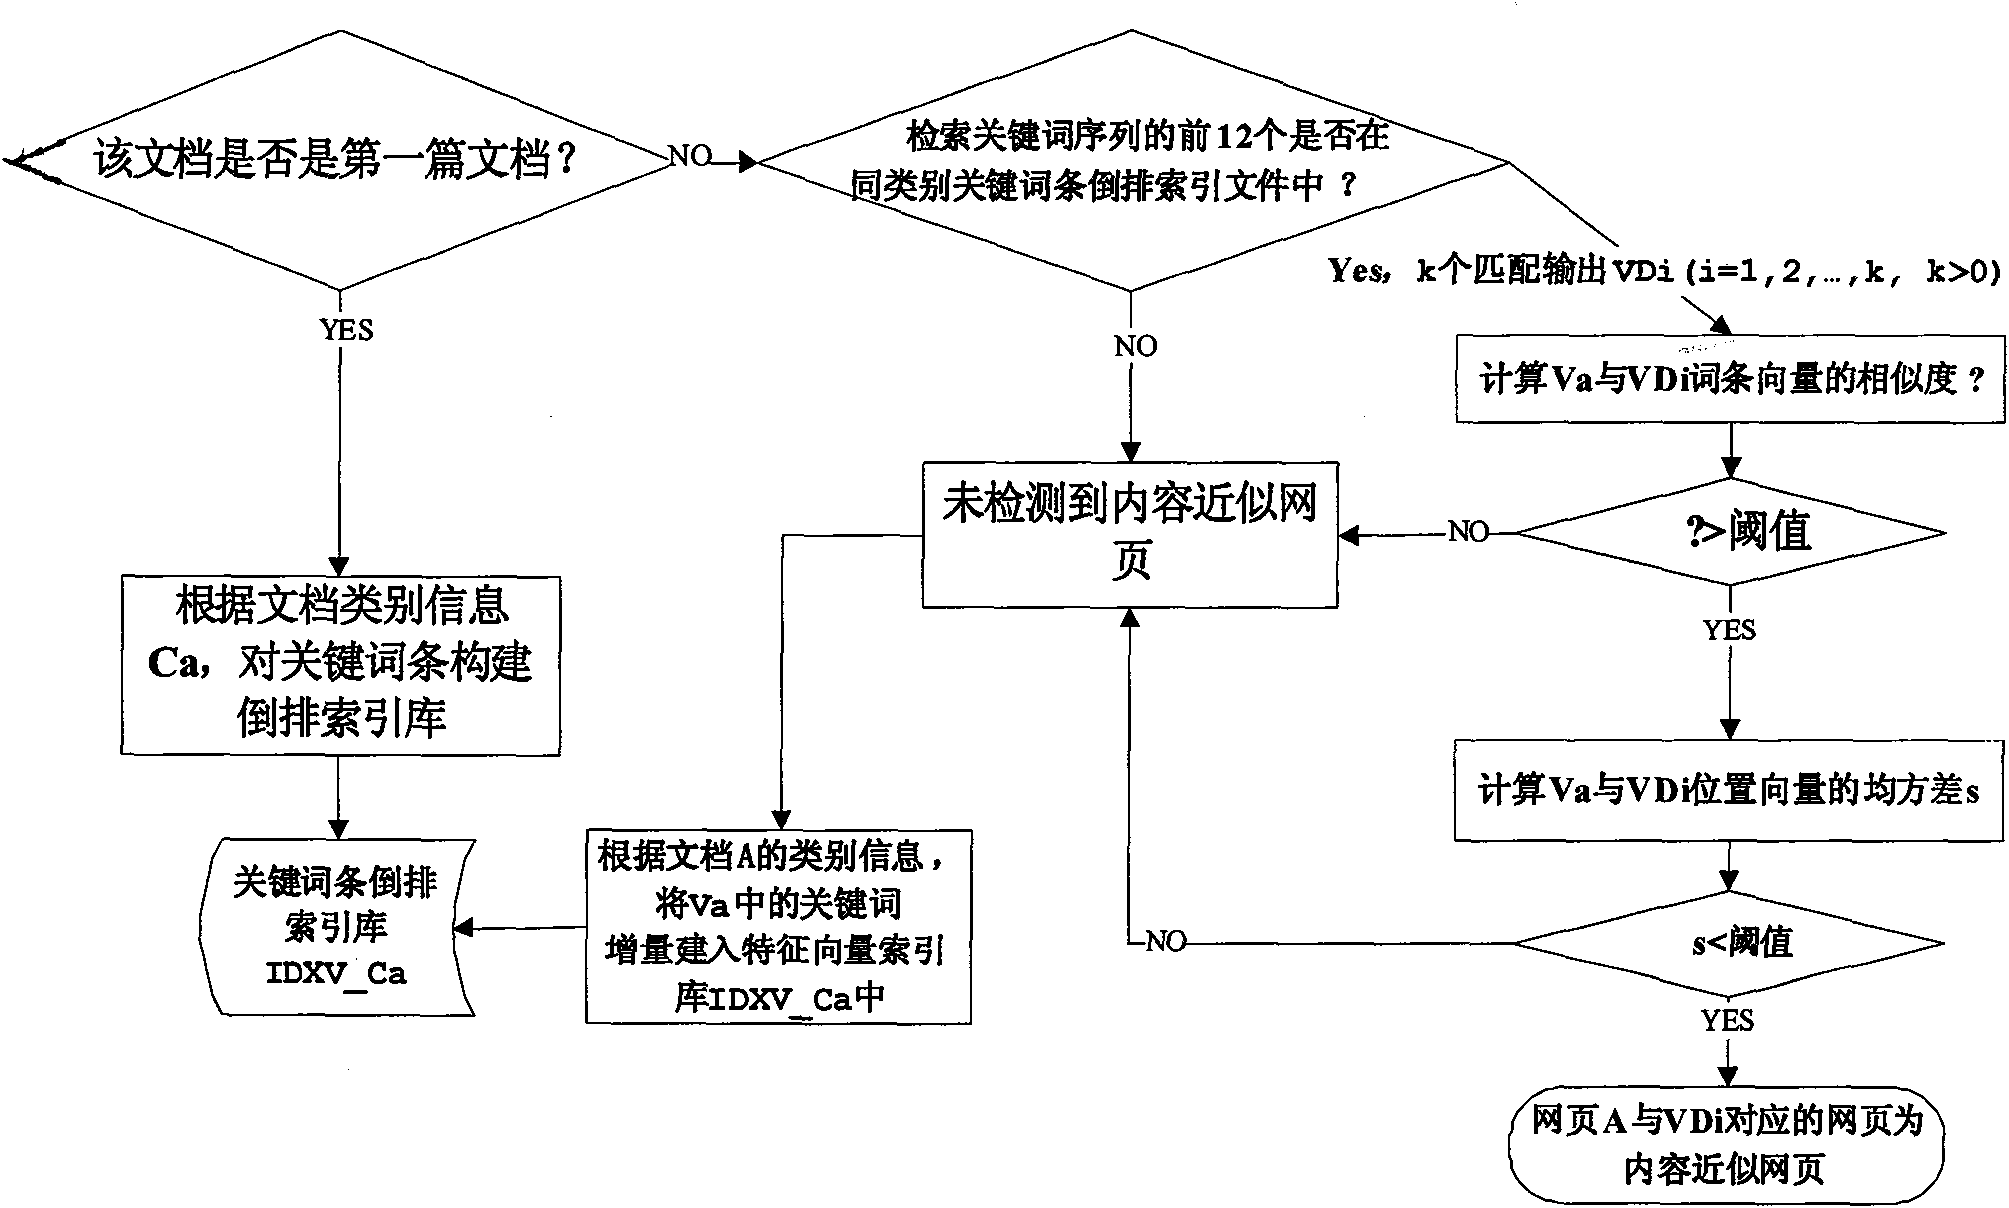 Chinese similar web page de-emphasis method based on microcosmic characteristic